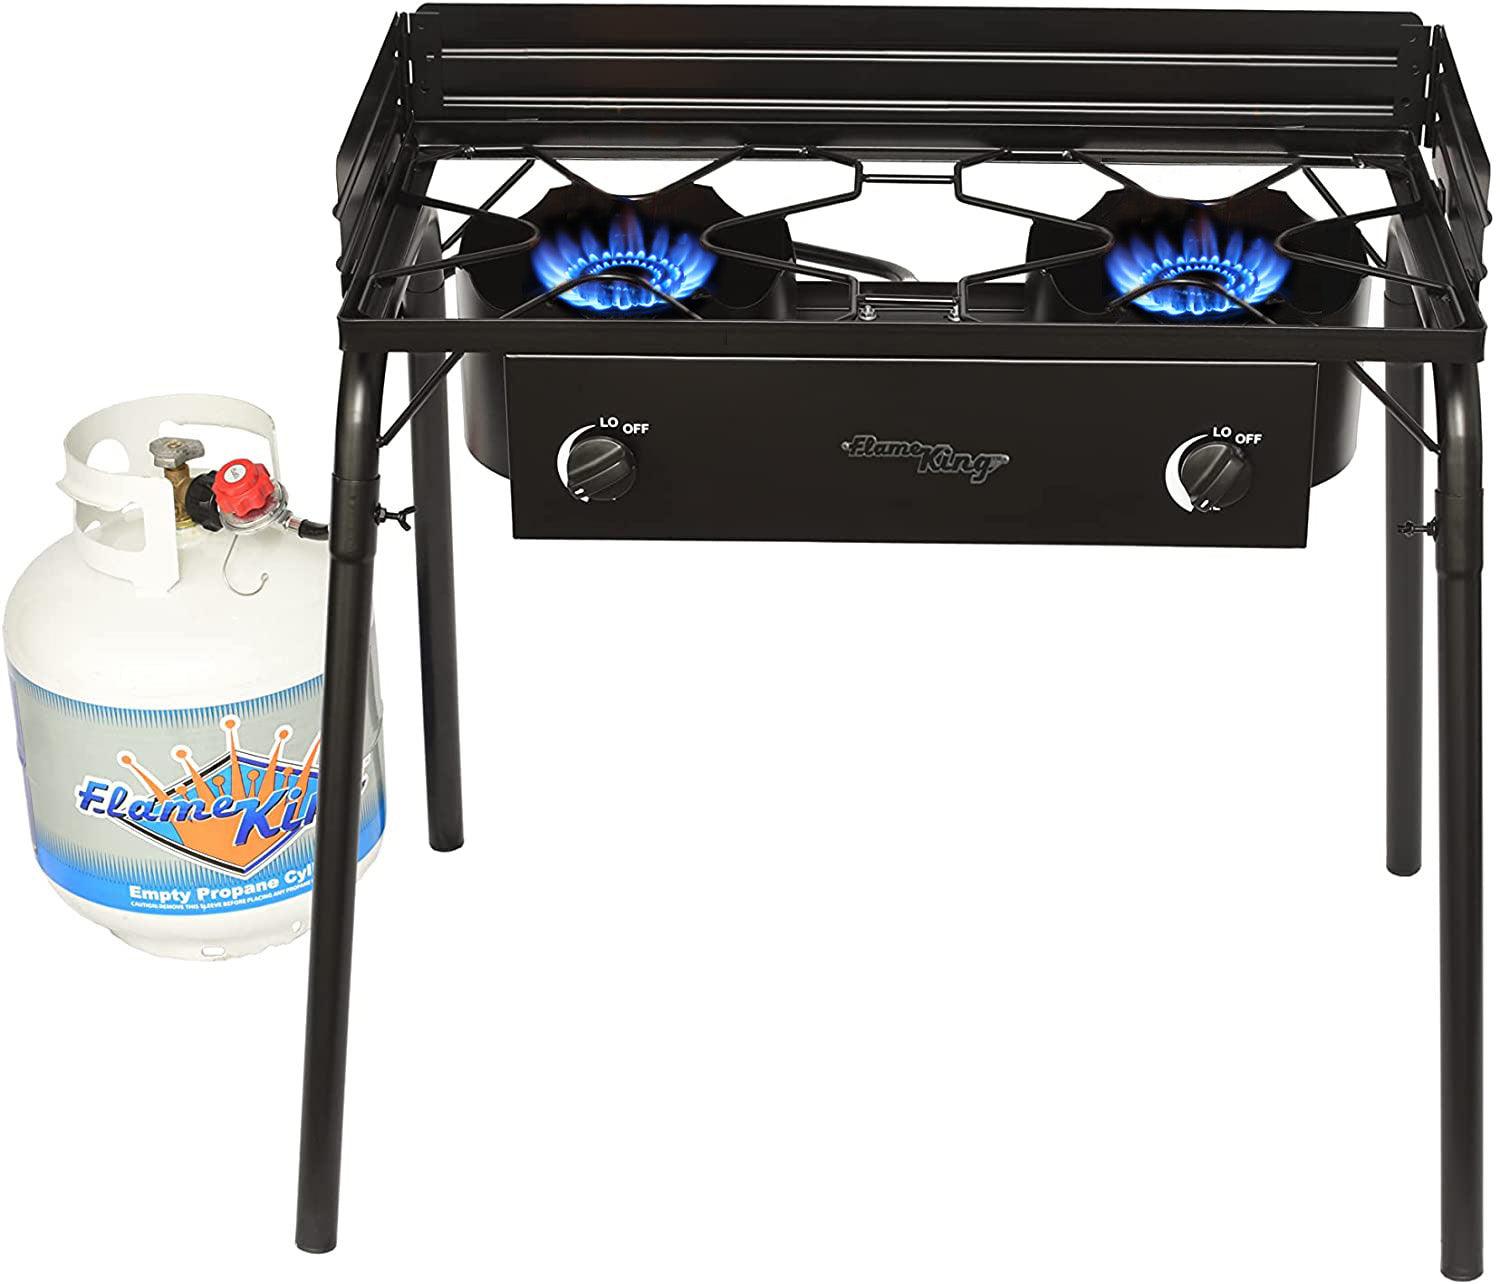 Double Burner Stove Outdoor Indoor Tempered Glass Gas Propane Stove Cooktop  Commercial Whirlwind Burner Camp Cooking